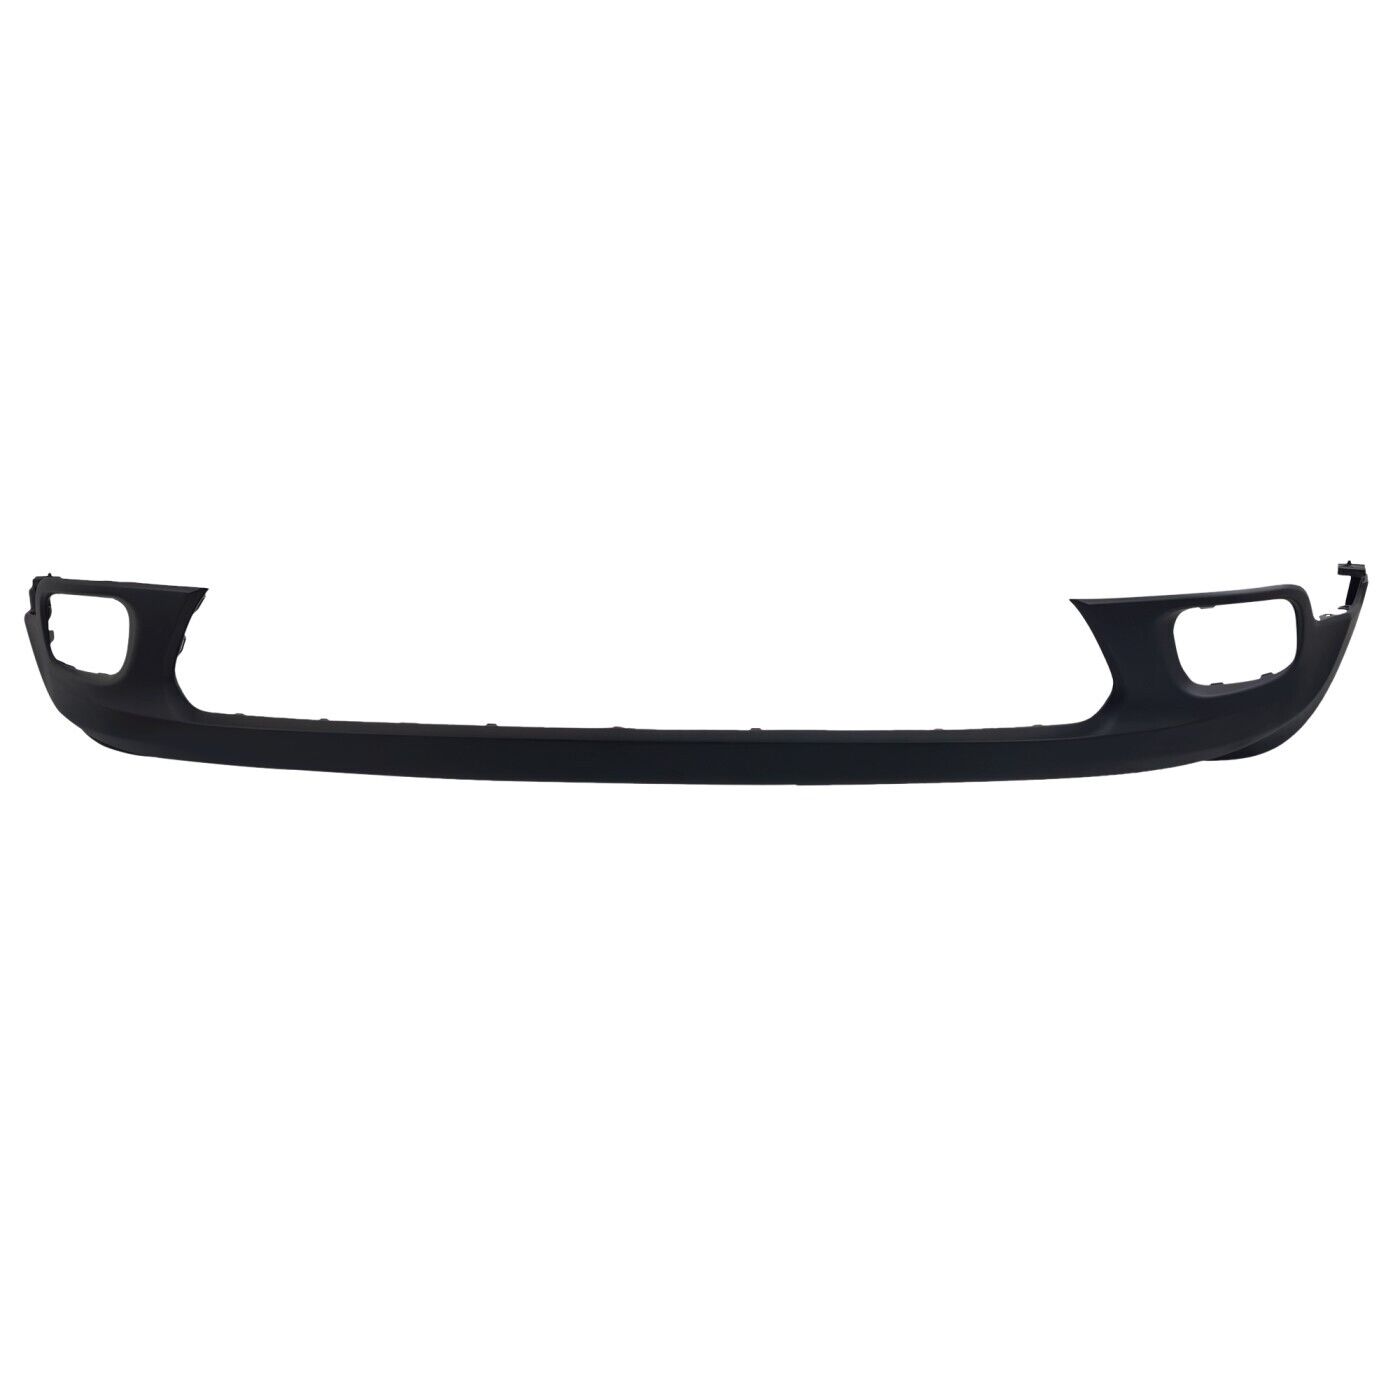 Front Lower Bumper Cover For 2014-2016 Jeep Cherokee w/ fog lamp holes Textured